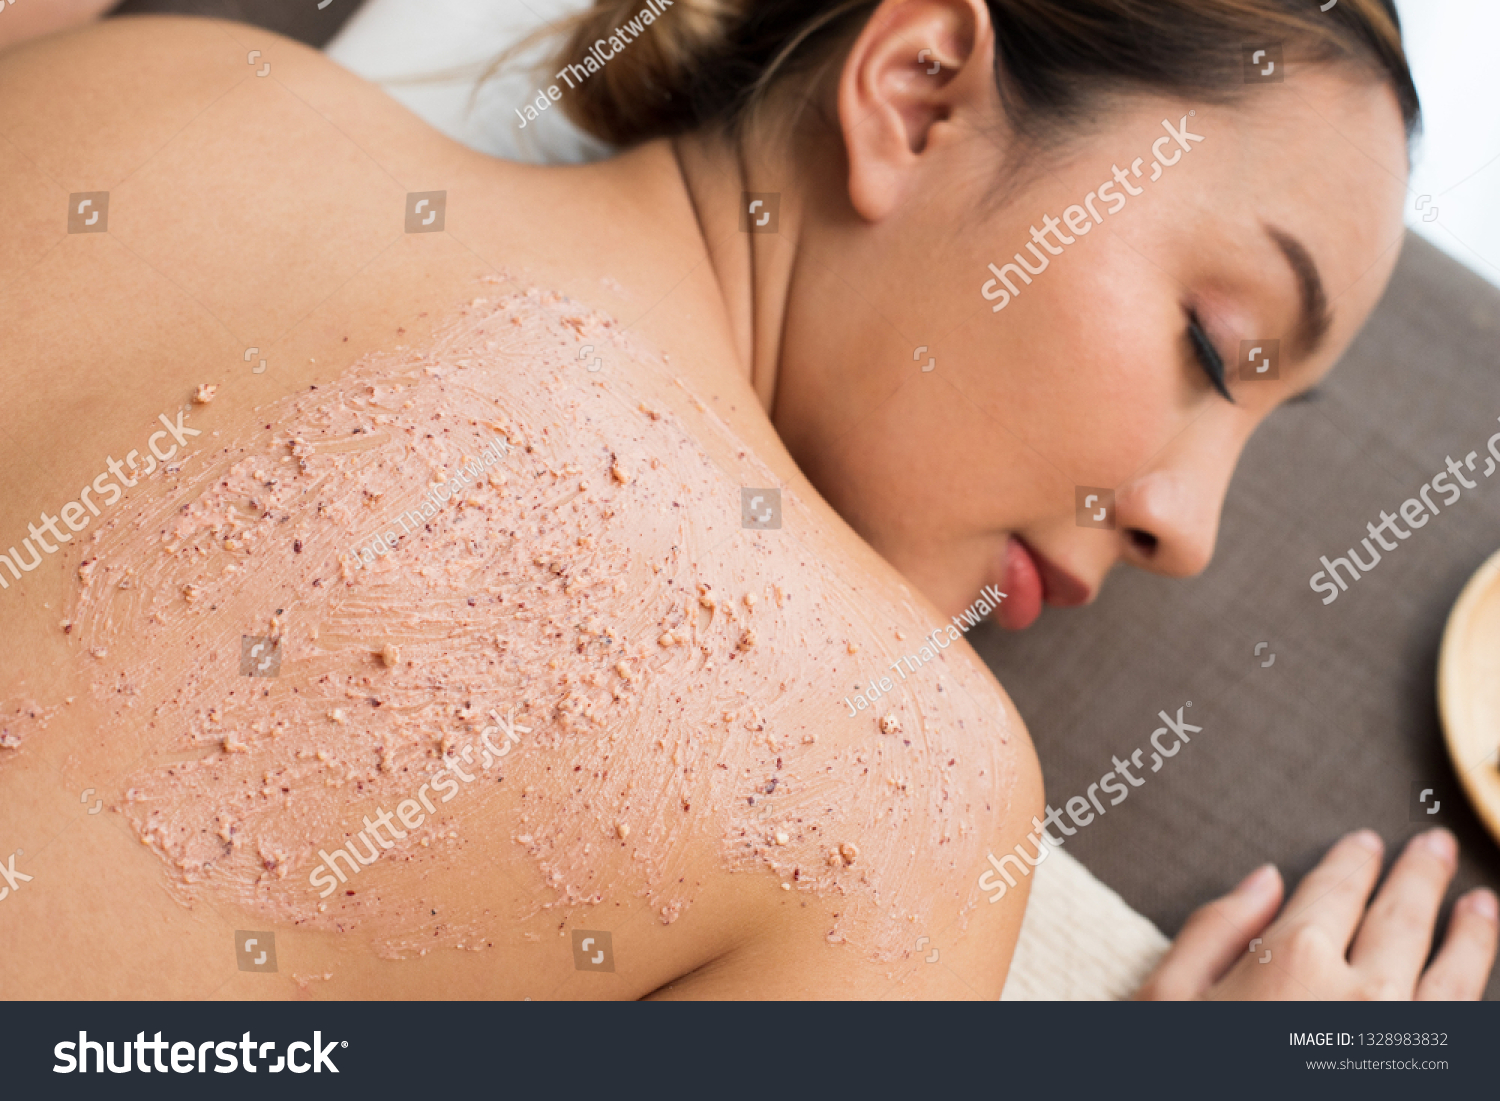 Professional Therapist scrub with light gentle green herbal Beauty Treatment on Mix Race Caucasian Asian woman skin back in the Health Spa, for smooth clean refresh new skin by scrubing old one #1328983832